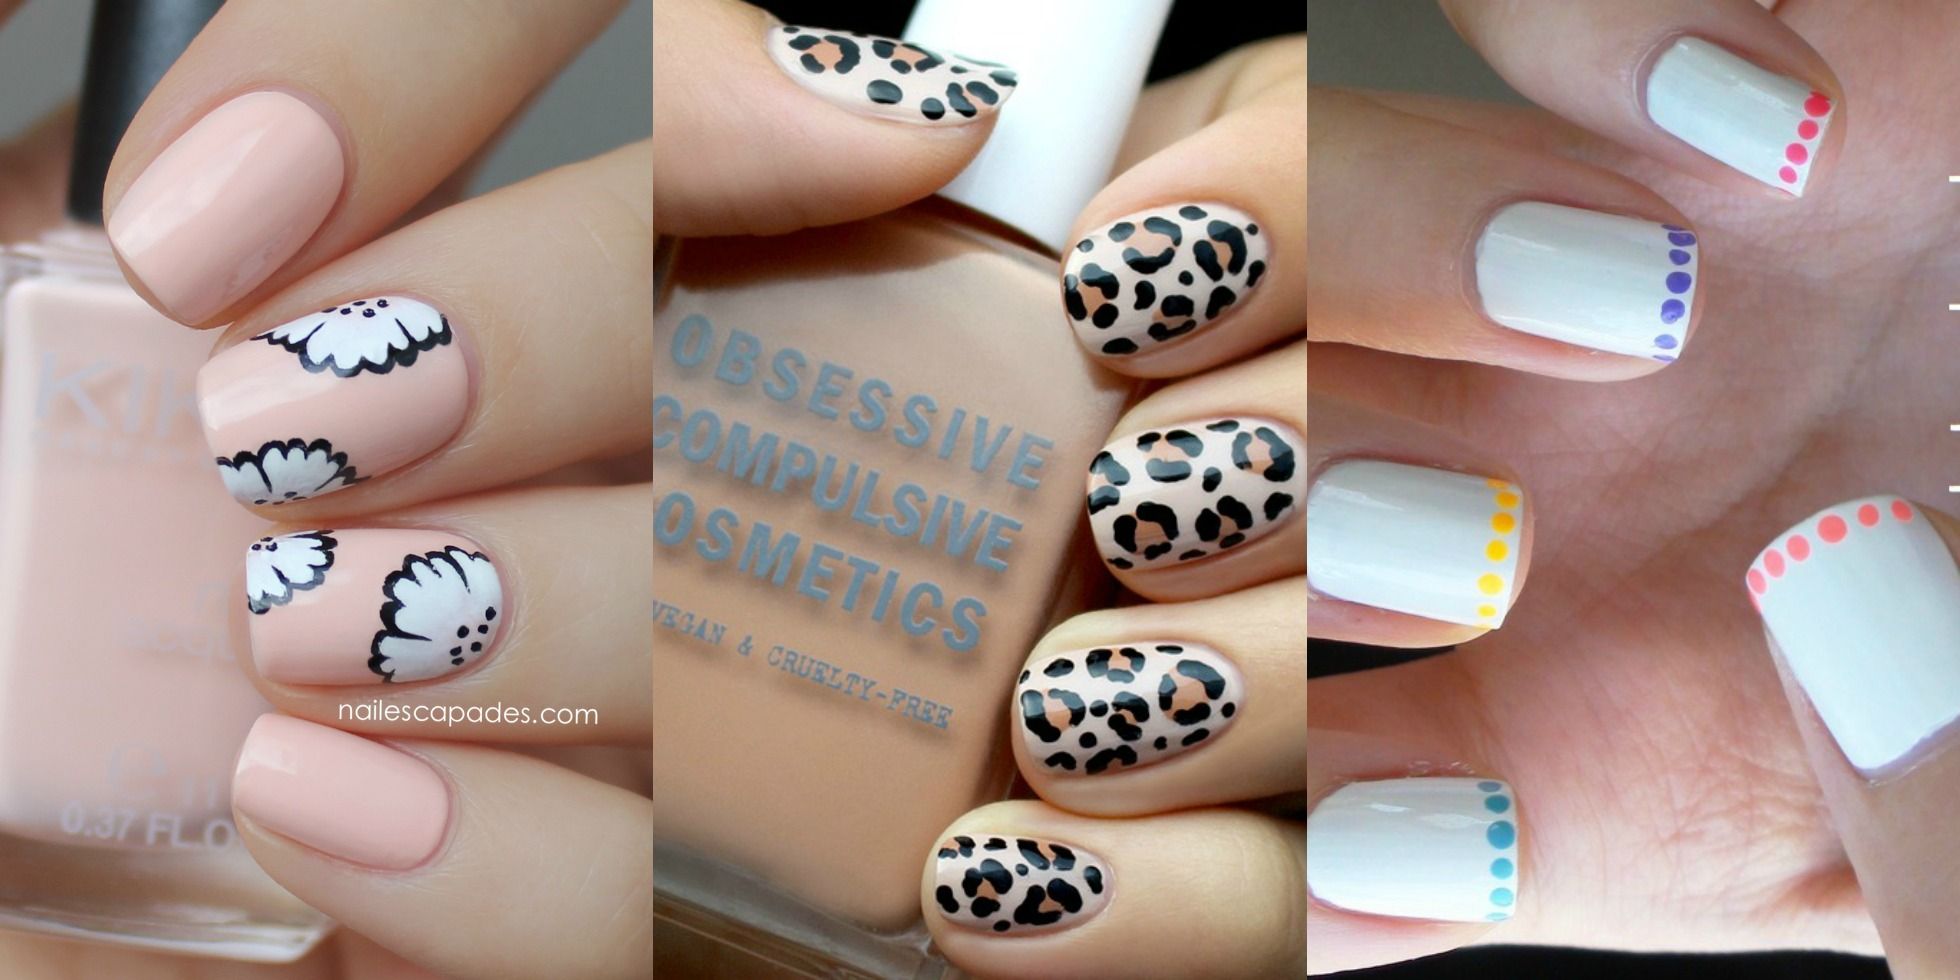 6. Nail Art Designs for Short Nails - wide 2